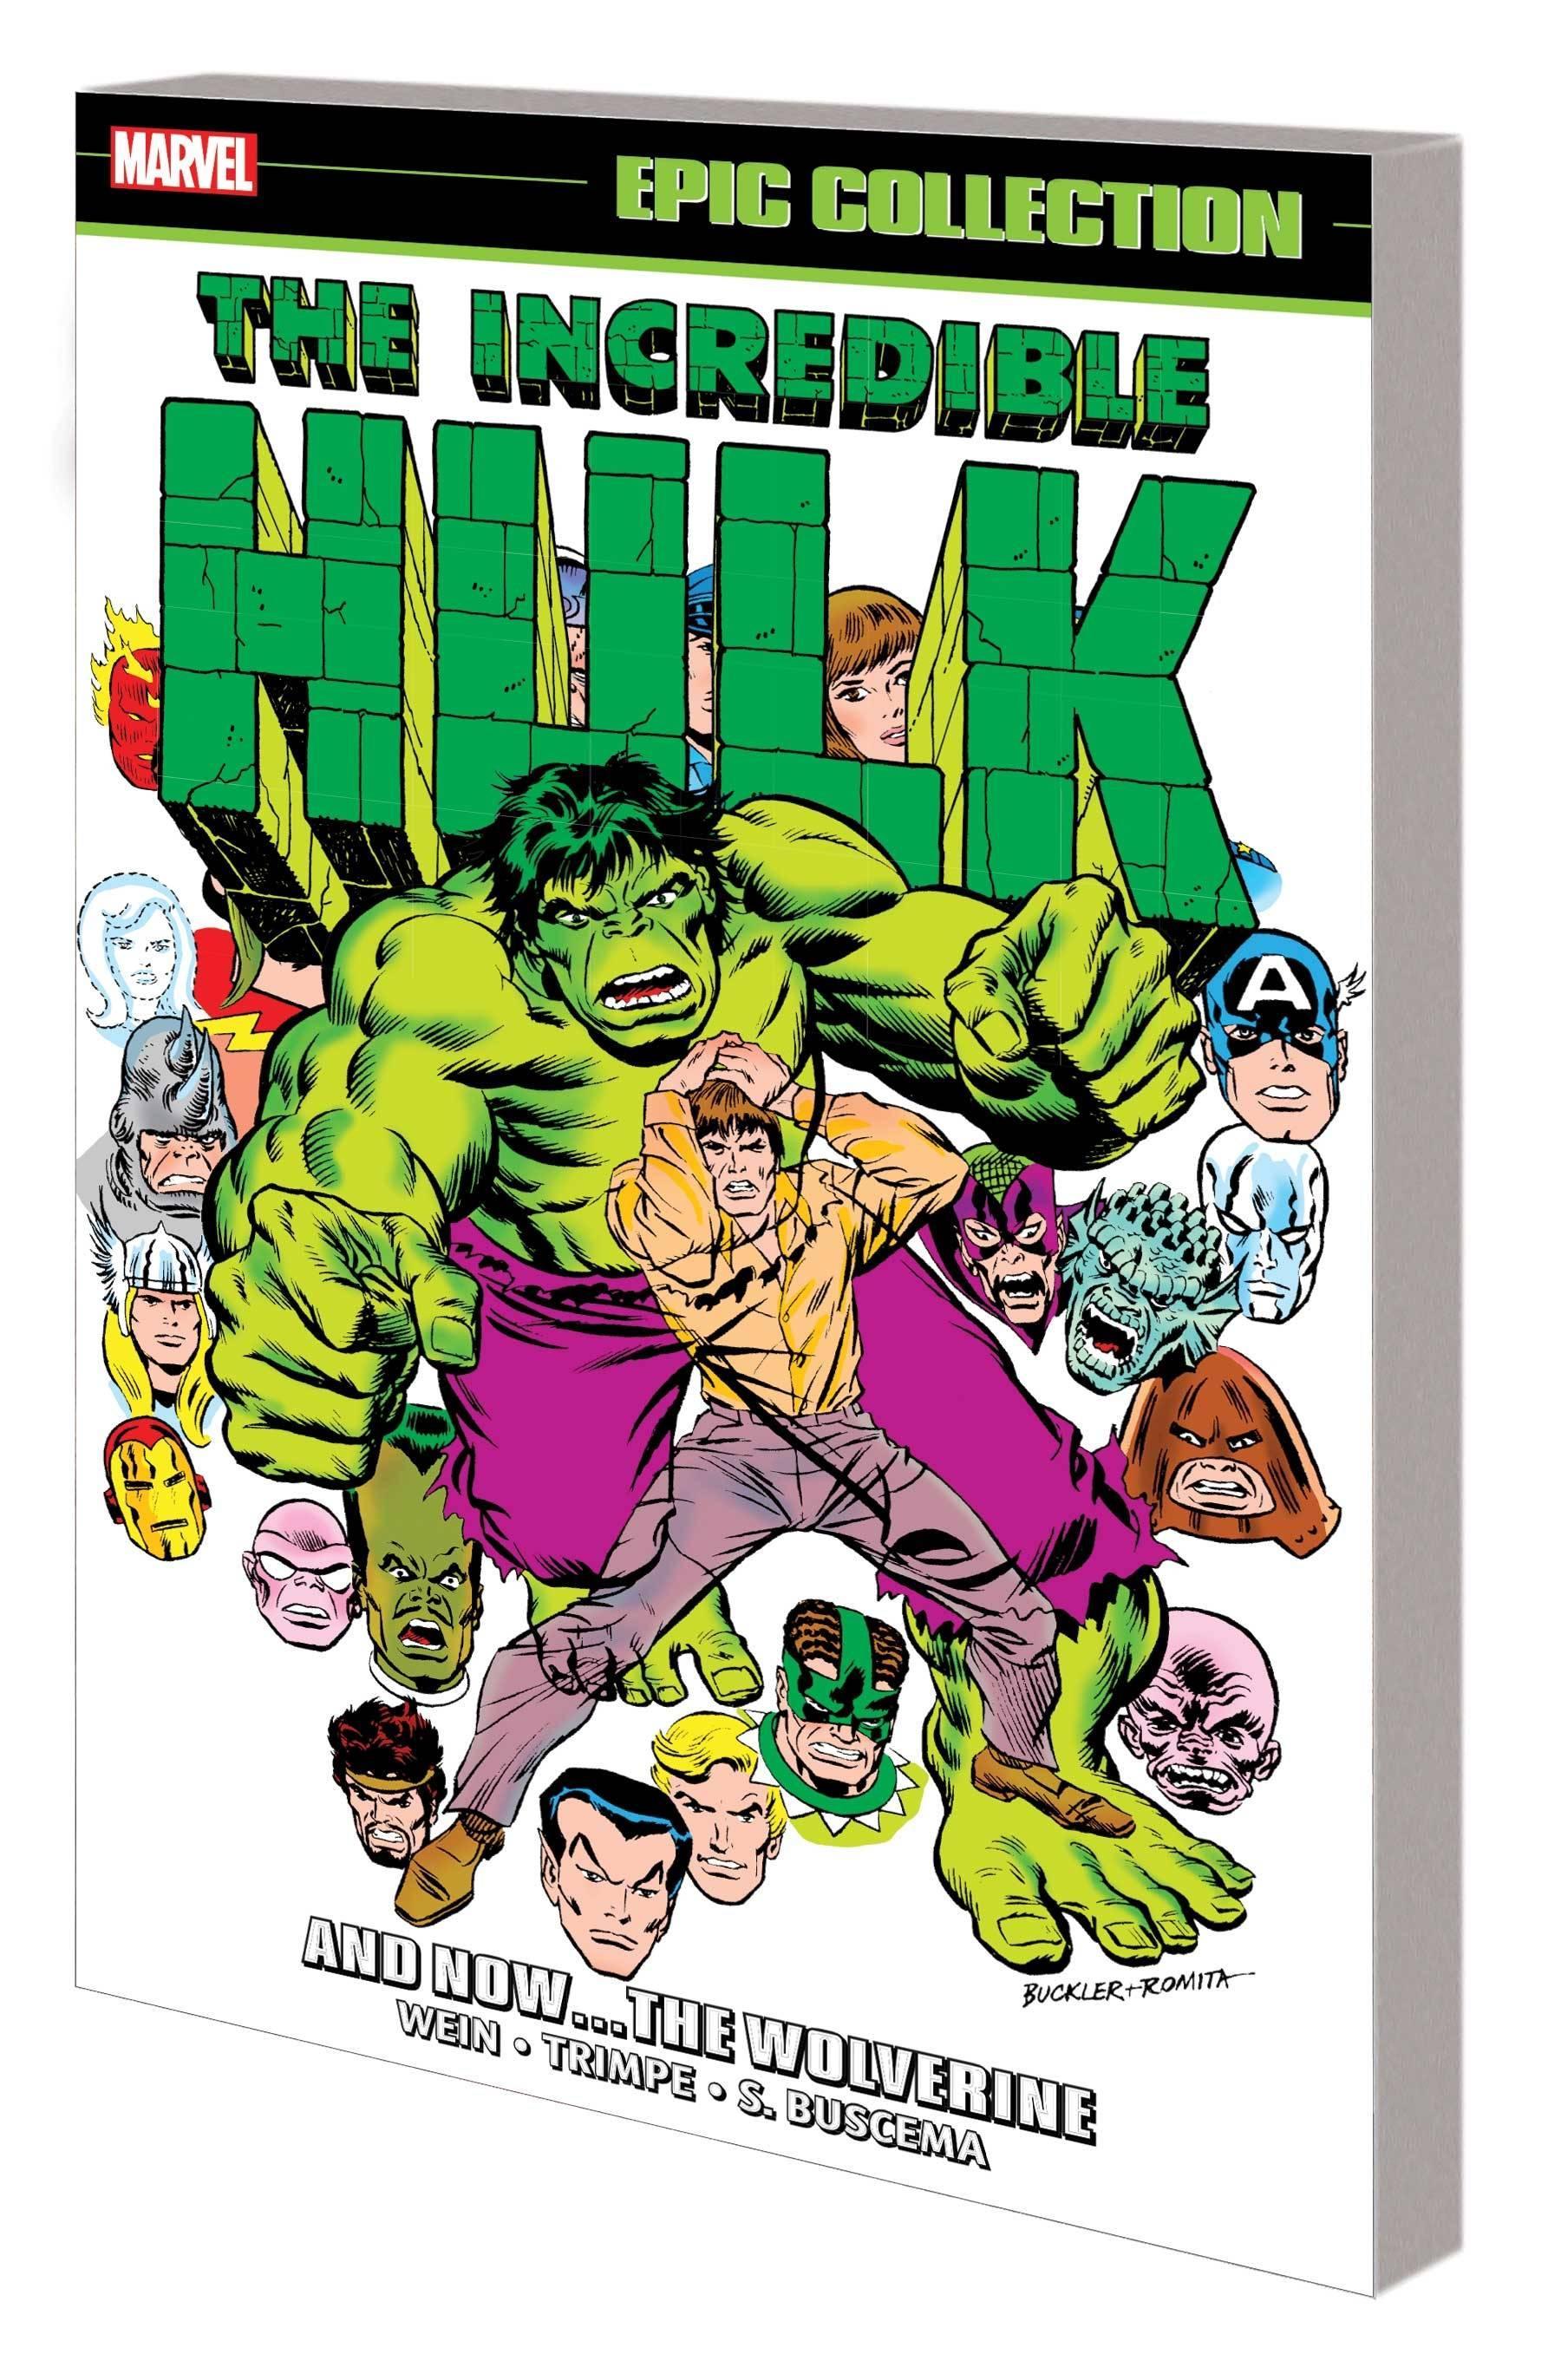 INCREDIBLE HULK EPIC COLLECTION TP VOL 07 AND NOW WOLVERINE - Kings Comics